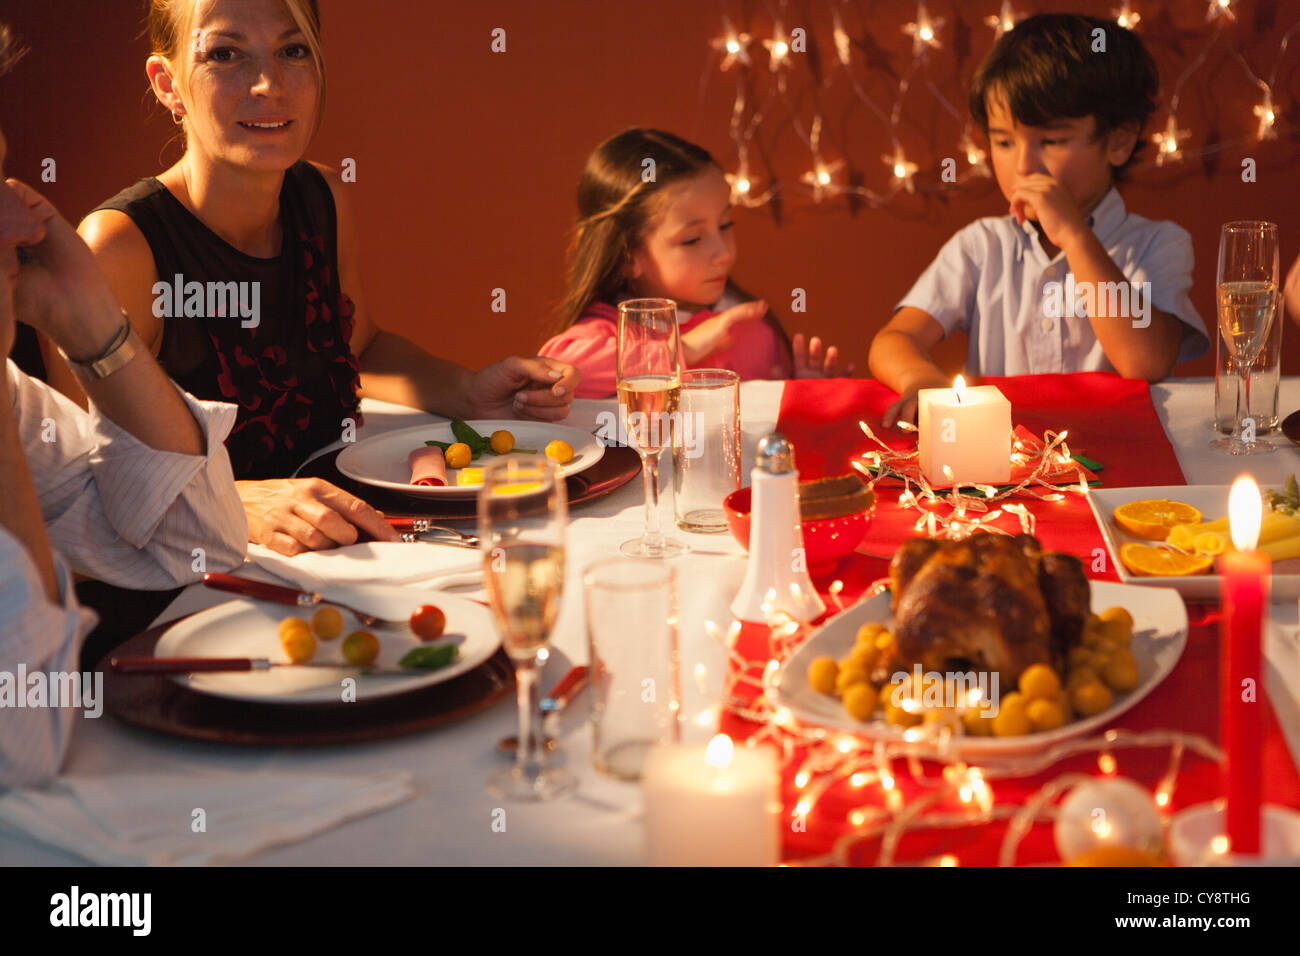 Family gathered around table for Christmas dinner Stock Photo - Alamy